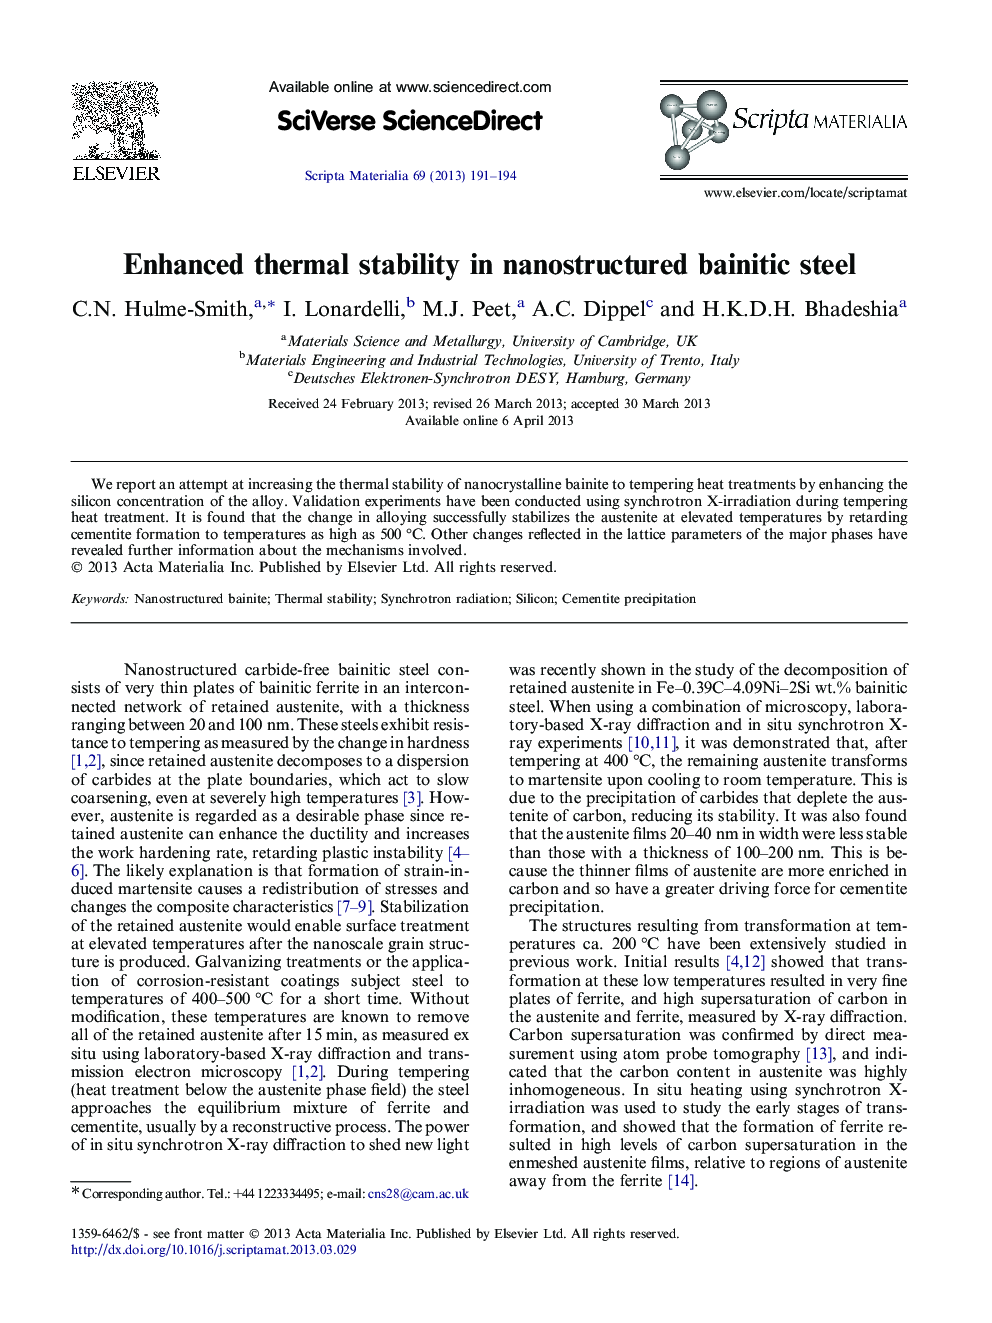 Enhanced thermal stability in nanostructured bainitic steel